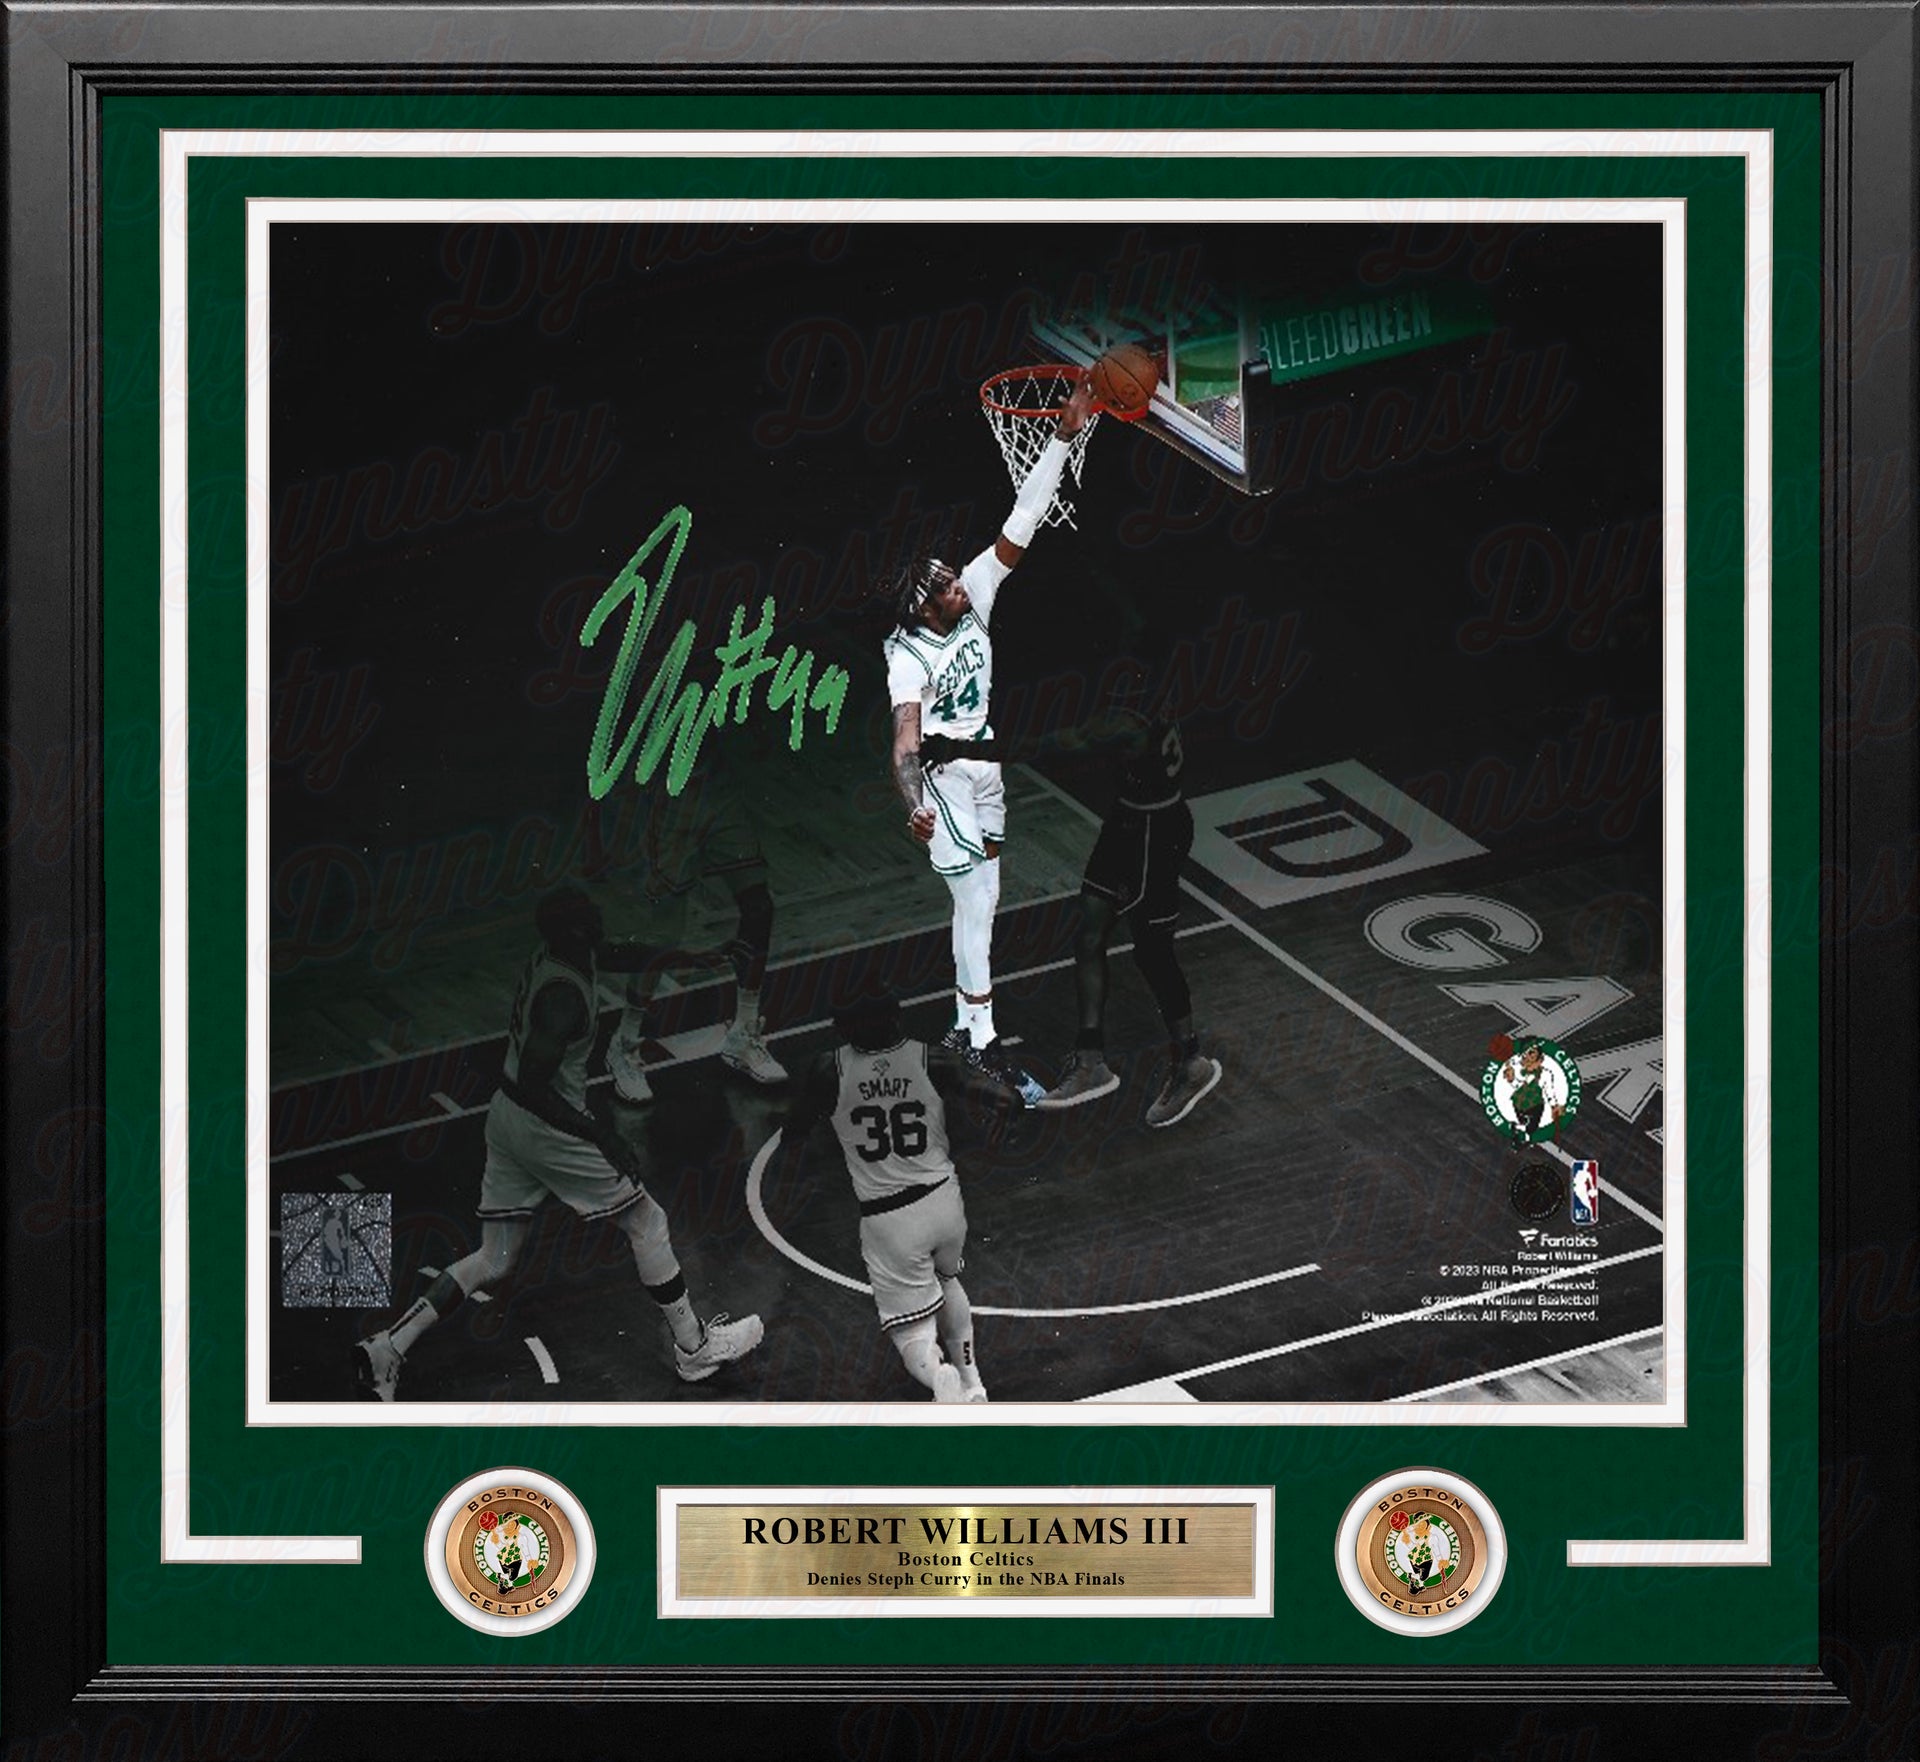 Hall of Framers - Curry signed and framed jersey, certified by